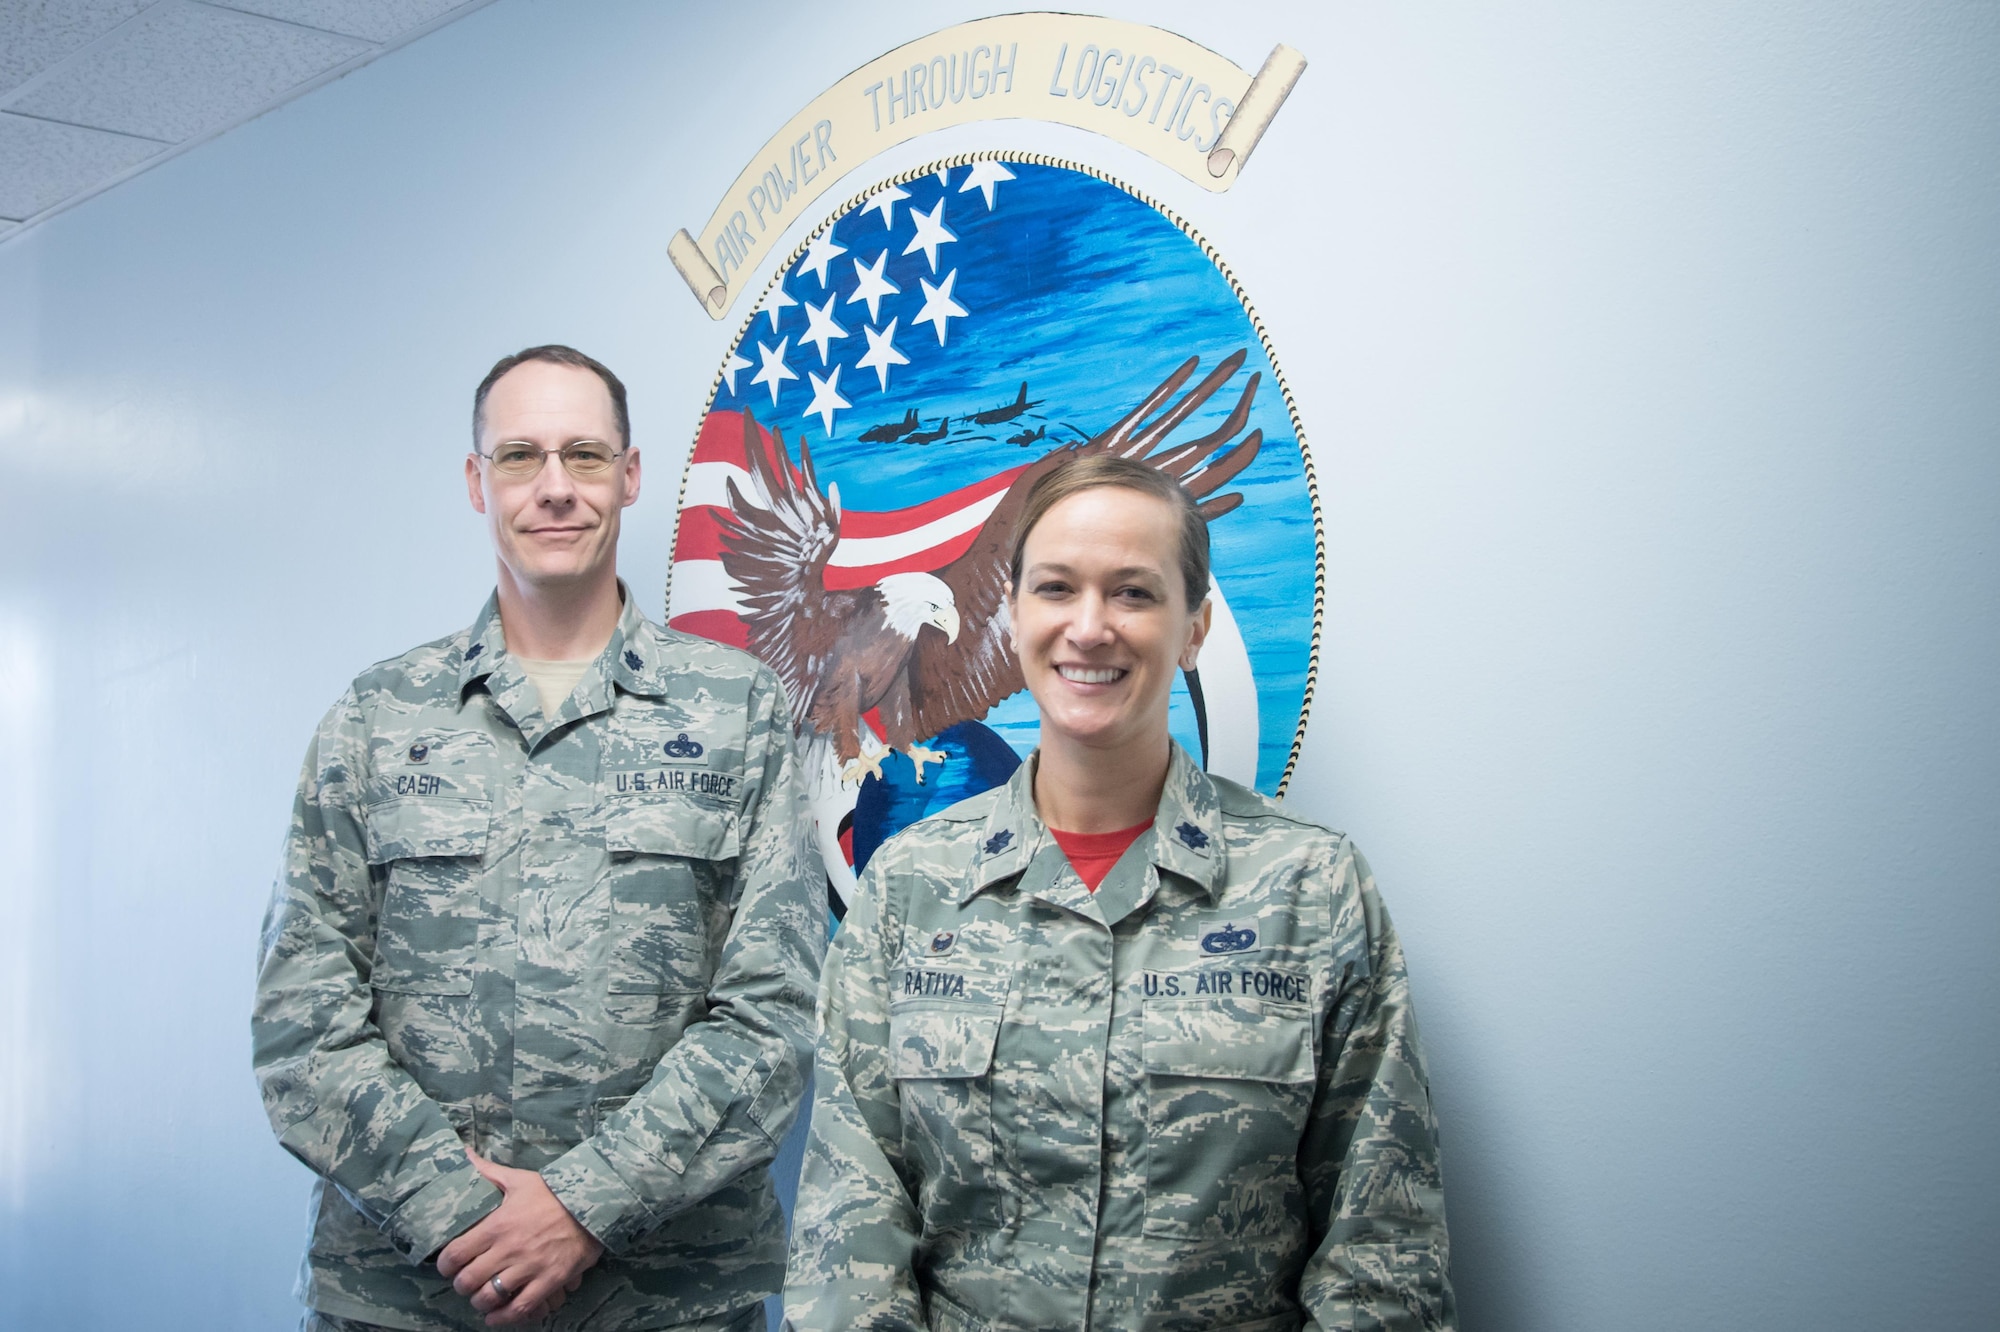 Lt. Col. Clinton Cash, 403rd Logistics Readiness Squadron commander and Lt. Col. Melissa Rativa, 81st LRS commander, pose for a photo March 2 at the Taylor Logistics Center on Keesler Air Force Base, Mississippi. (U.S. Air Force photo/Staff Sgt. Heather Heiney)